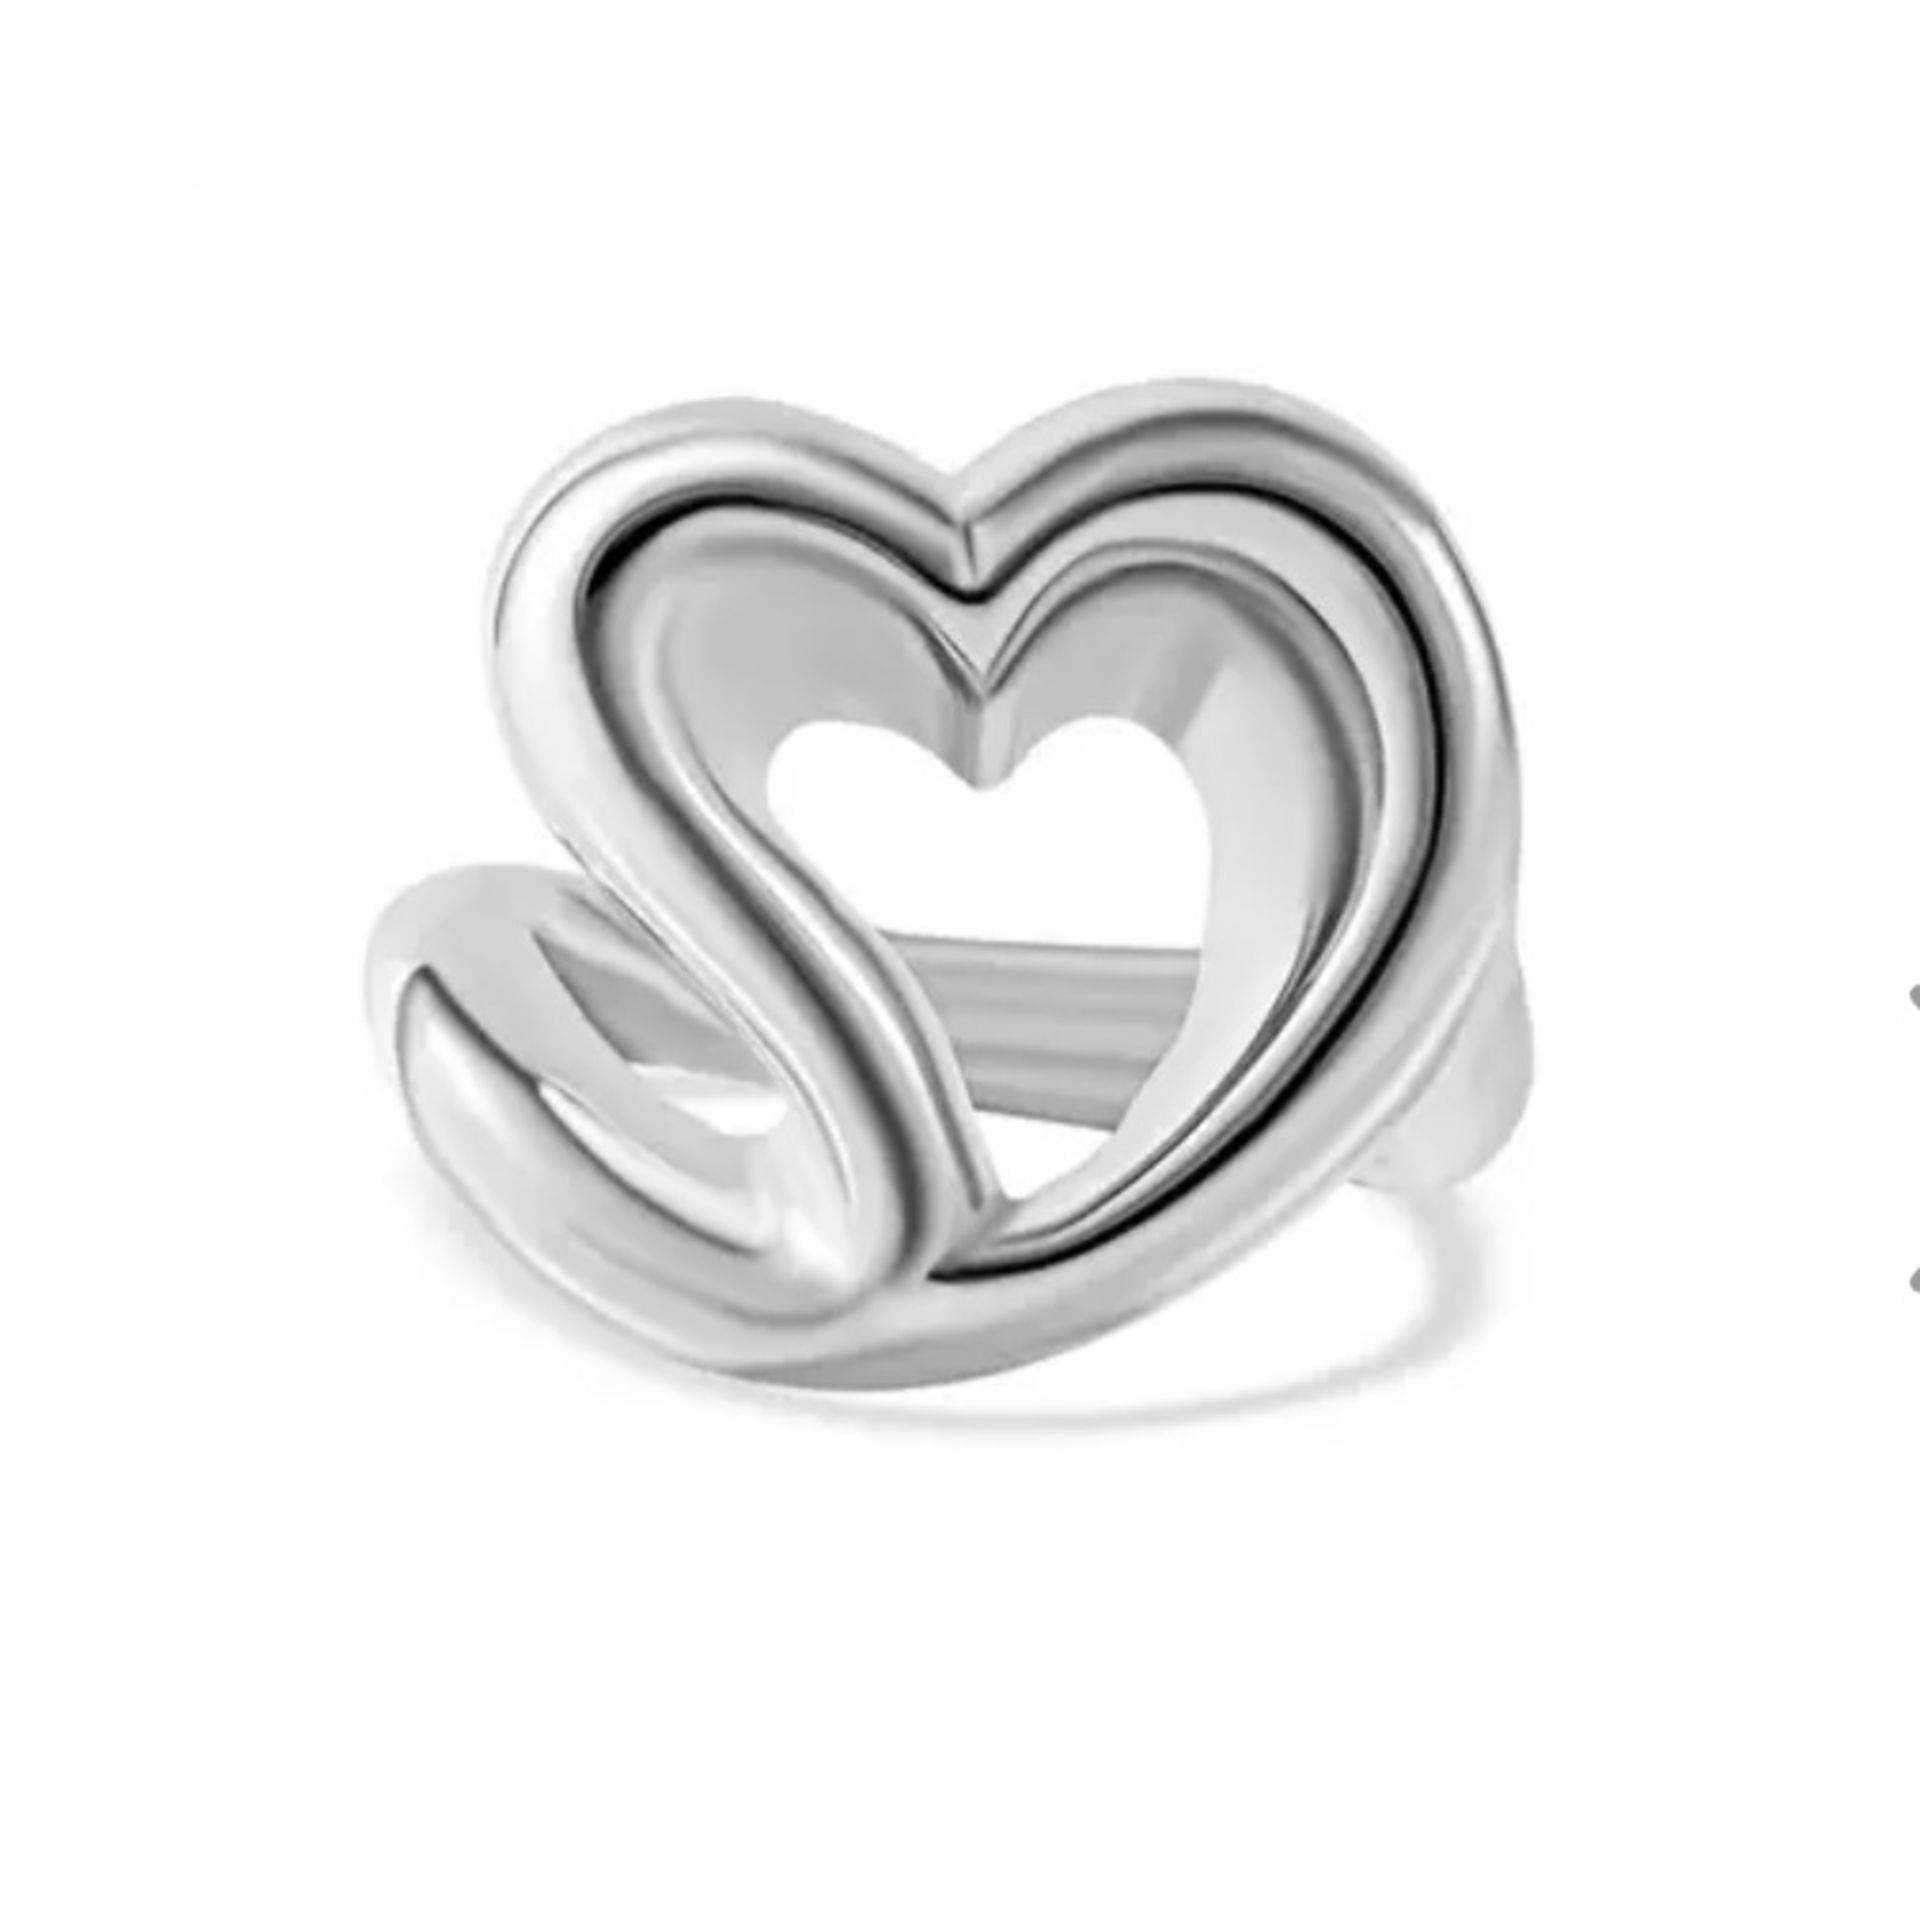 New! Sterling Silver Heart Ring. - Image 3 of 4